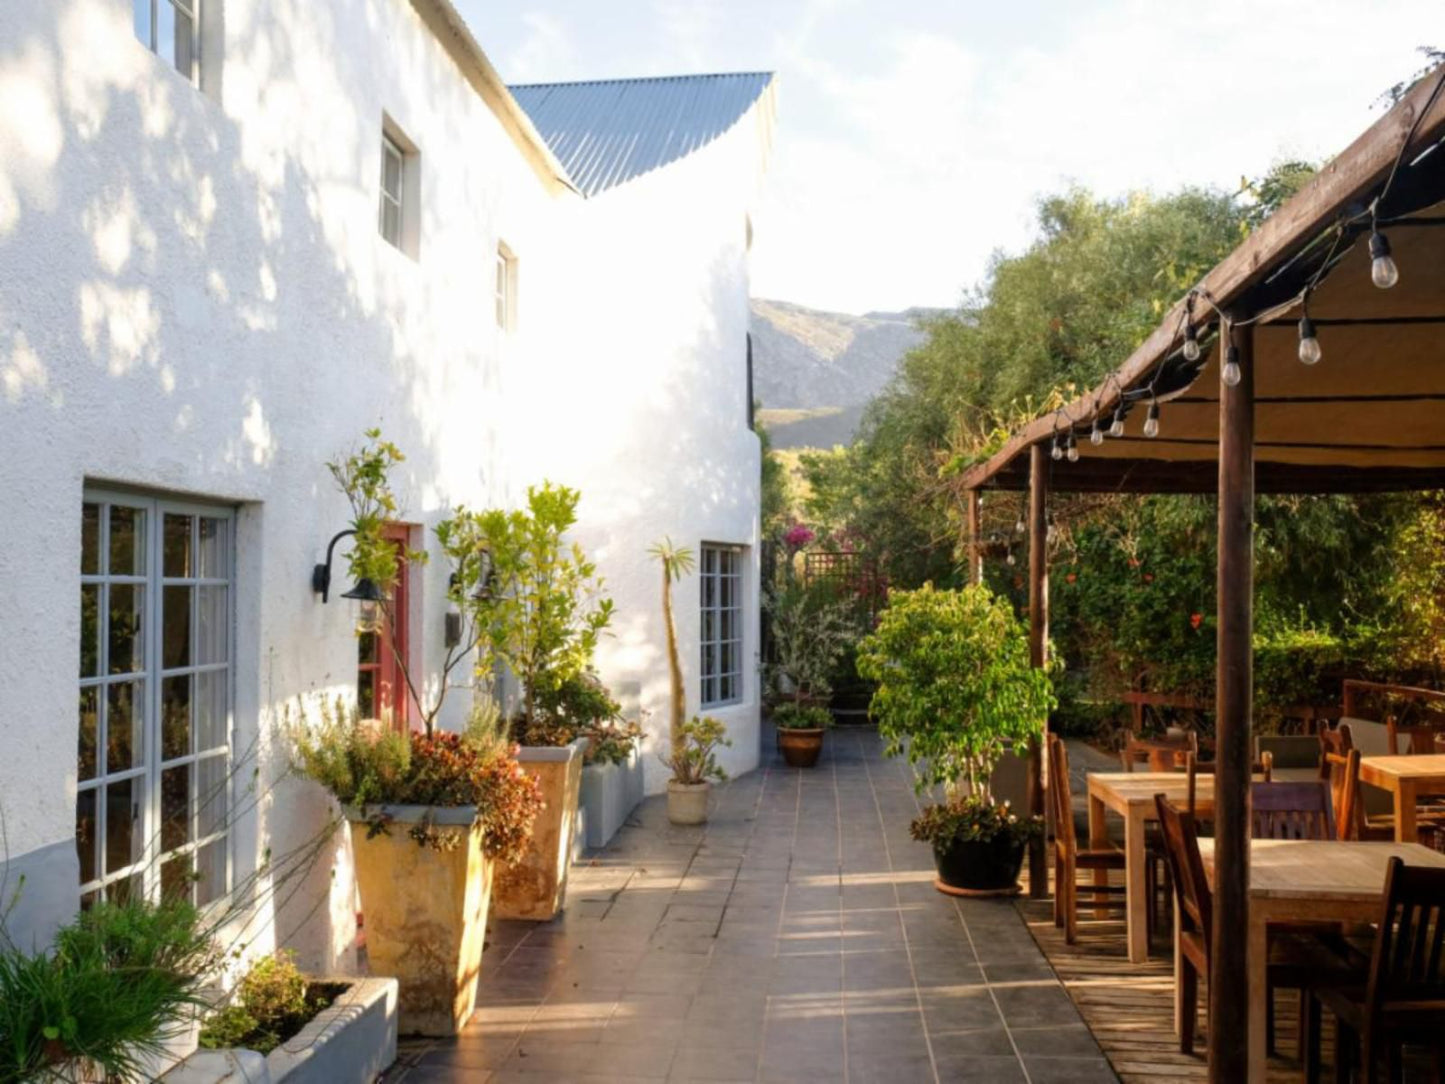 Kogman And Keisie Guest Farm Montagu Western Cape South Africa House, Building, Architecture